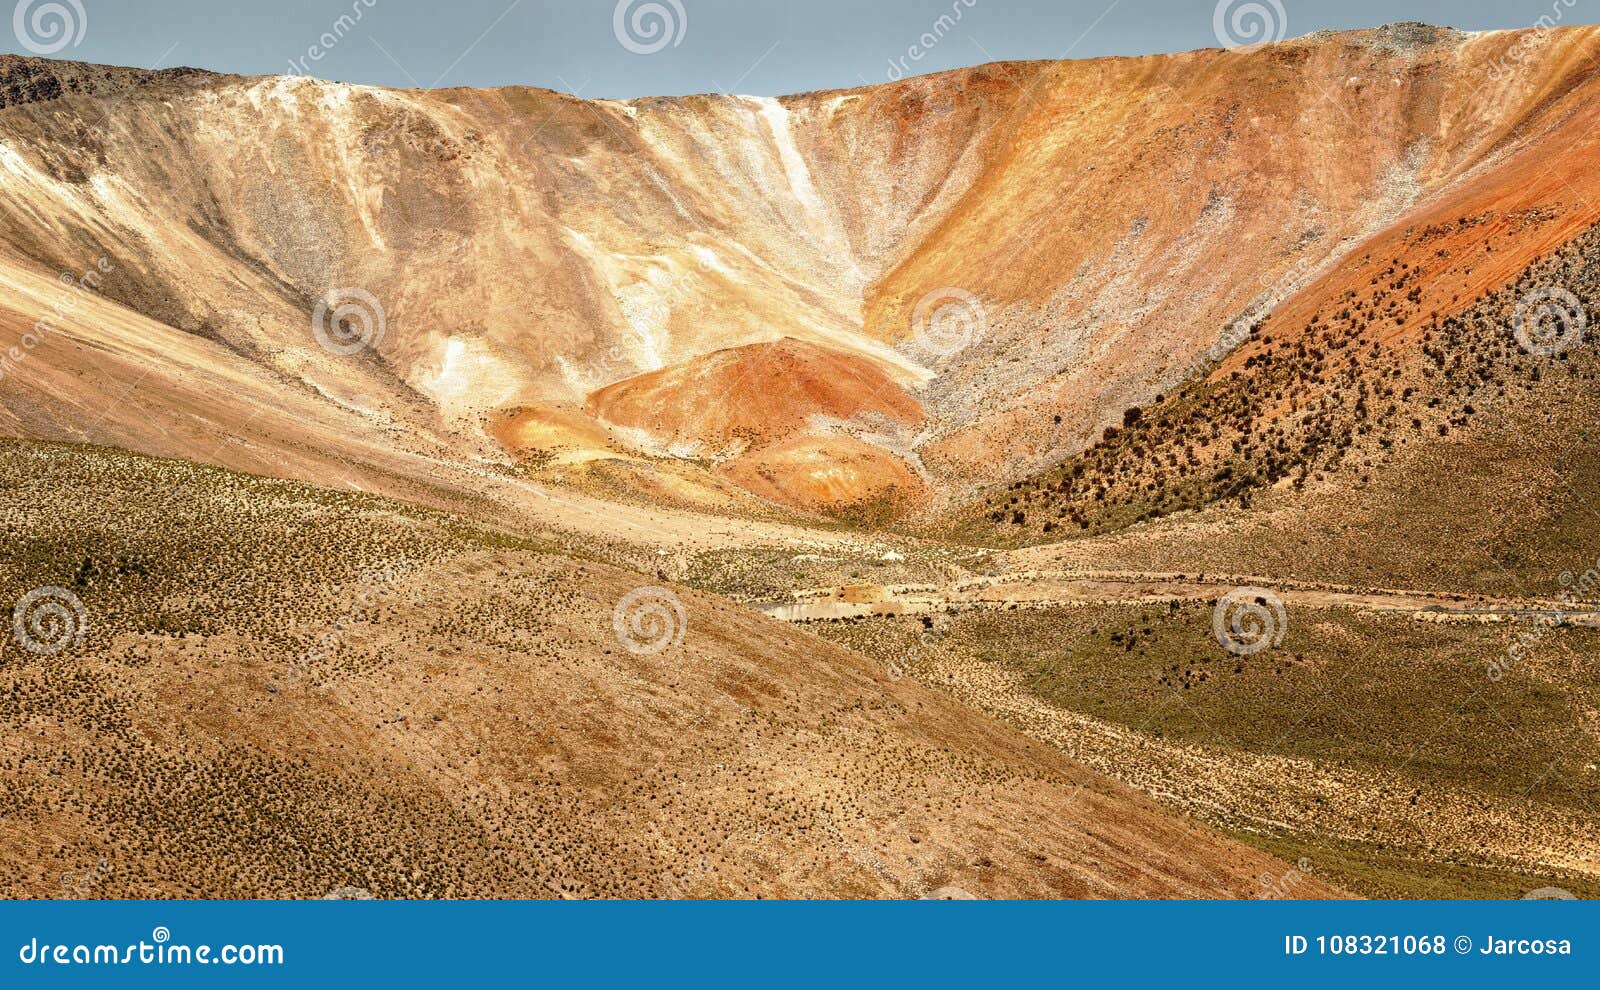 crater of multicolored volcano, near the town of cariquima and c